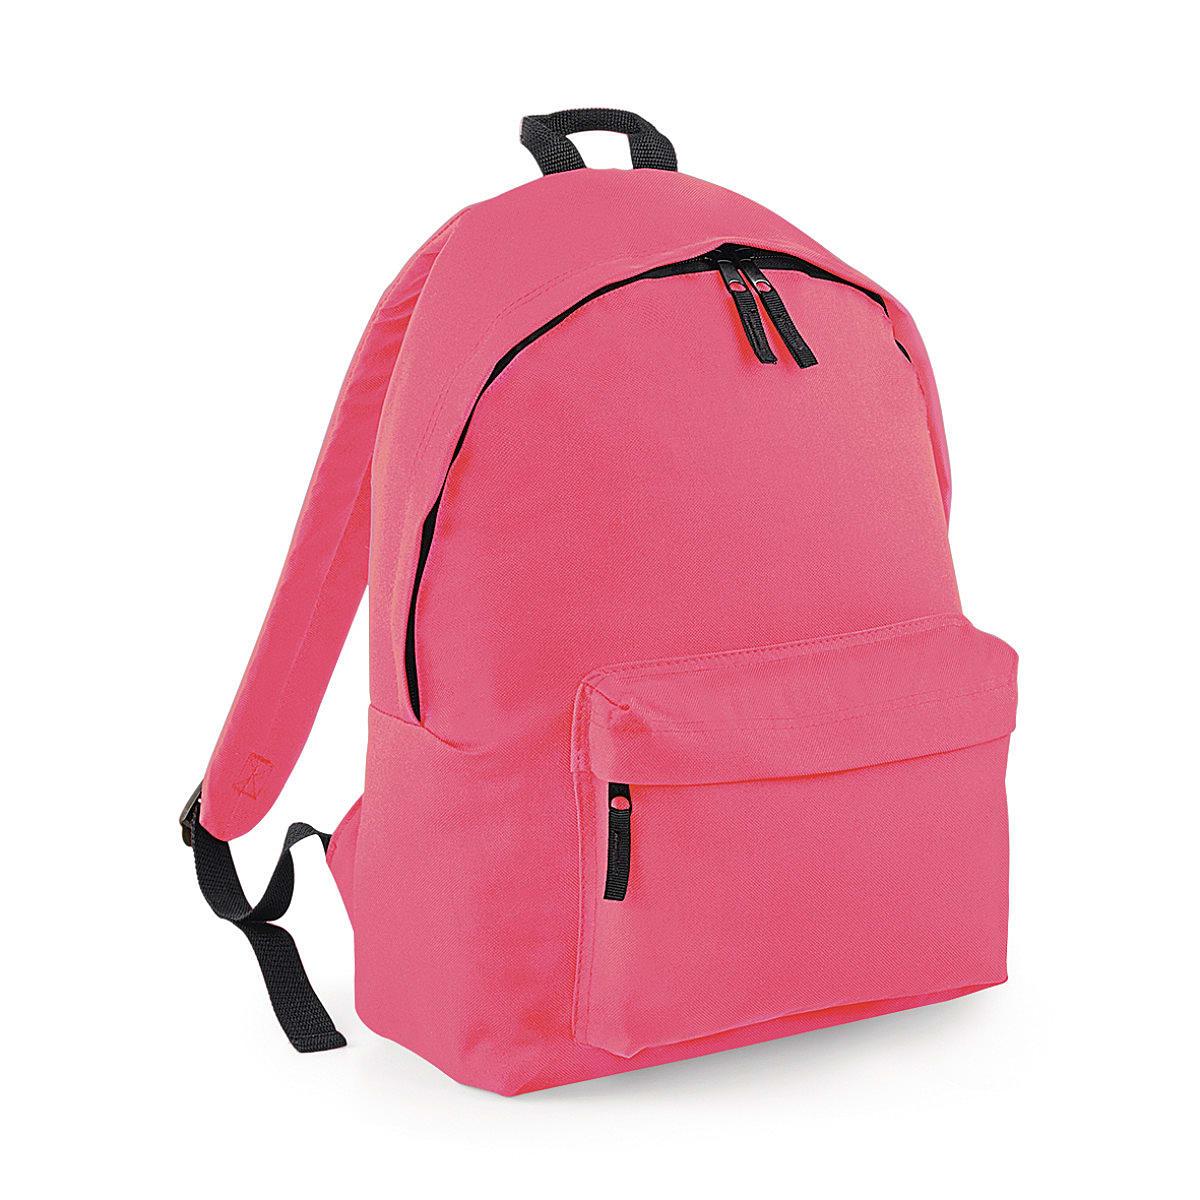 Bagbase Fashion Backpack in Fluorescent Pink (Product Code: BG125)